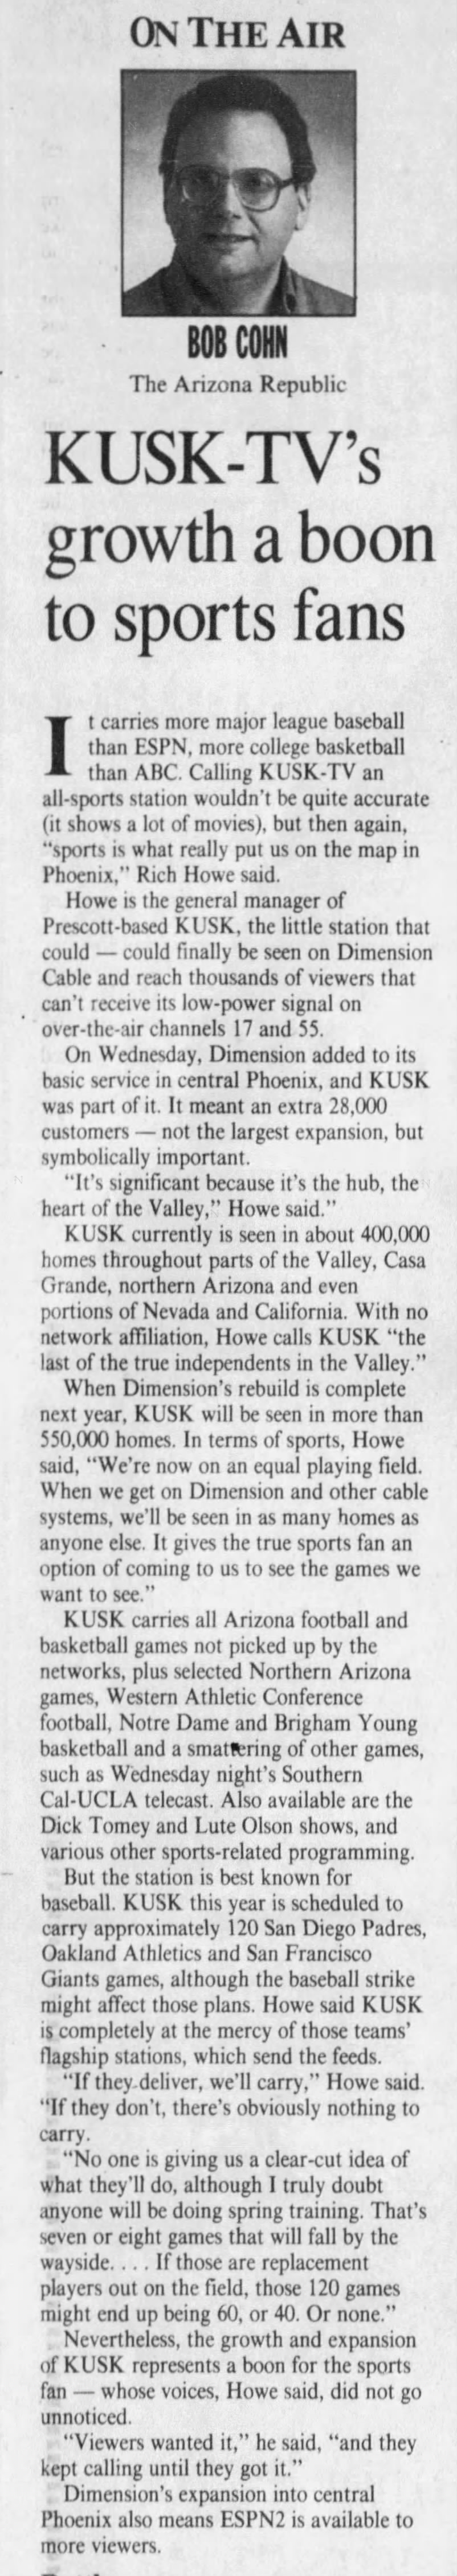 KUSK-TV's growth a boon to sports fans